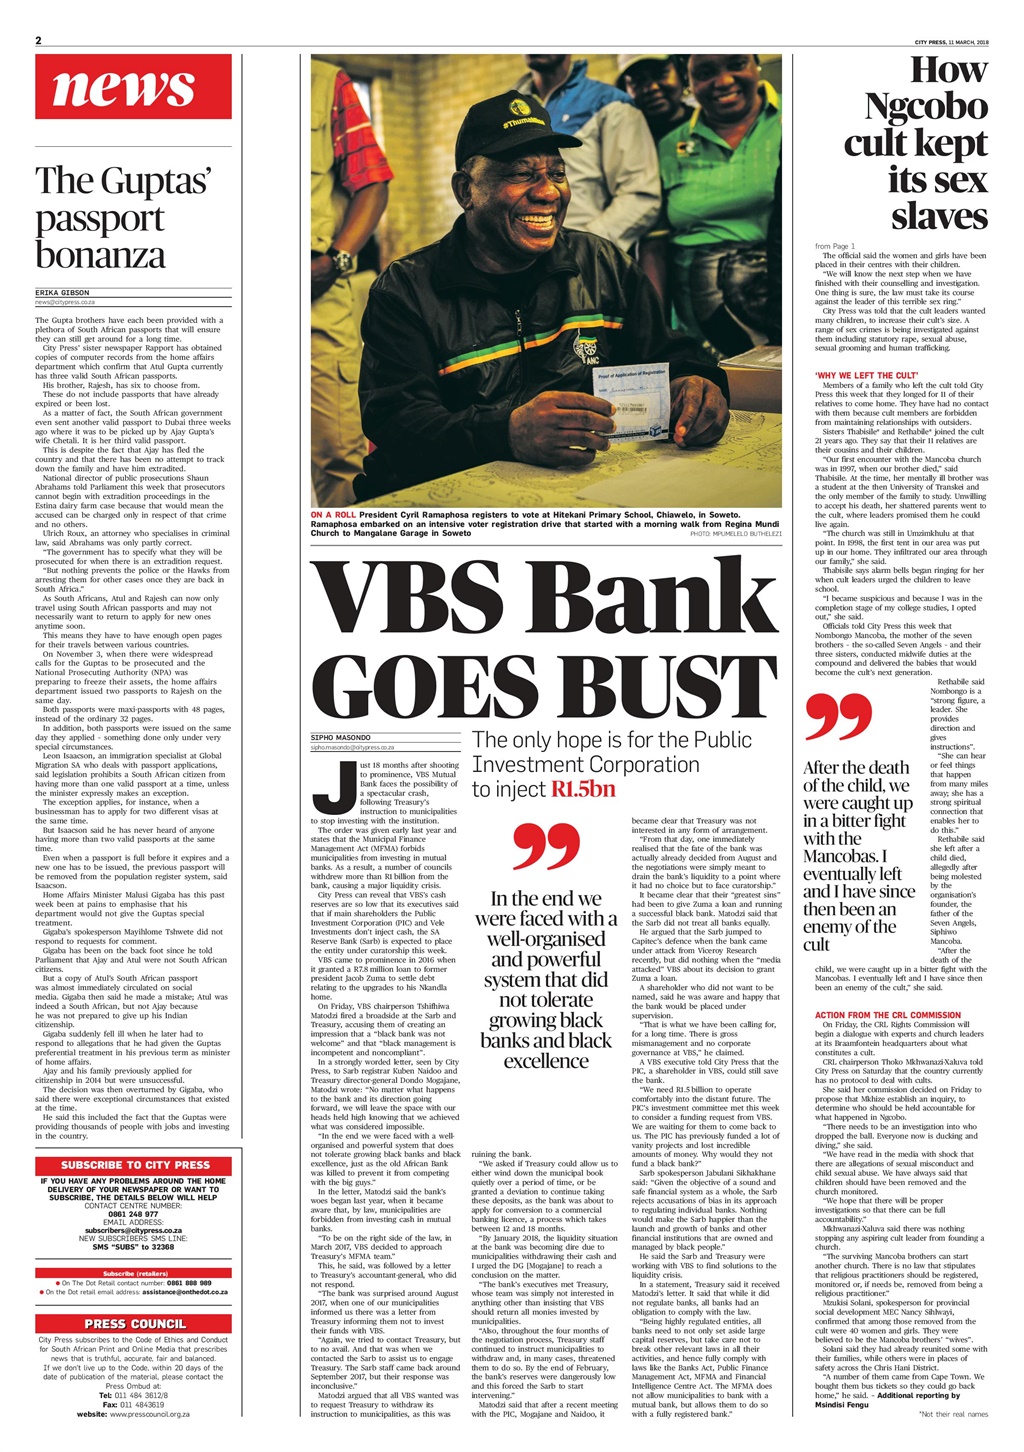 On March 11 2018 City Press reported that VBS faced a 'spectacular crash'.